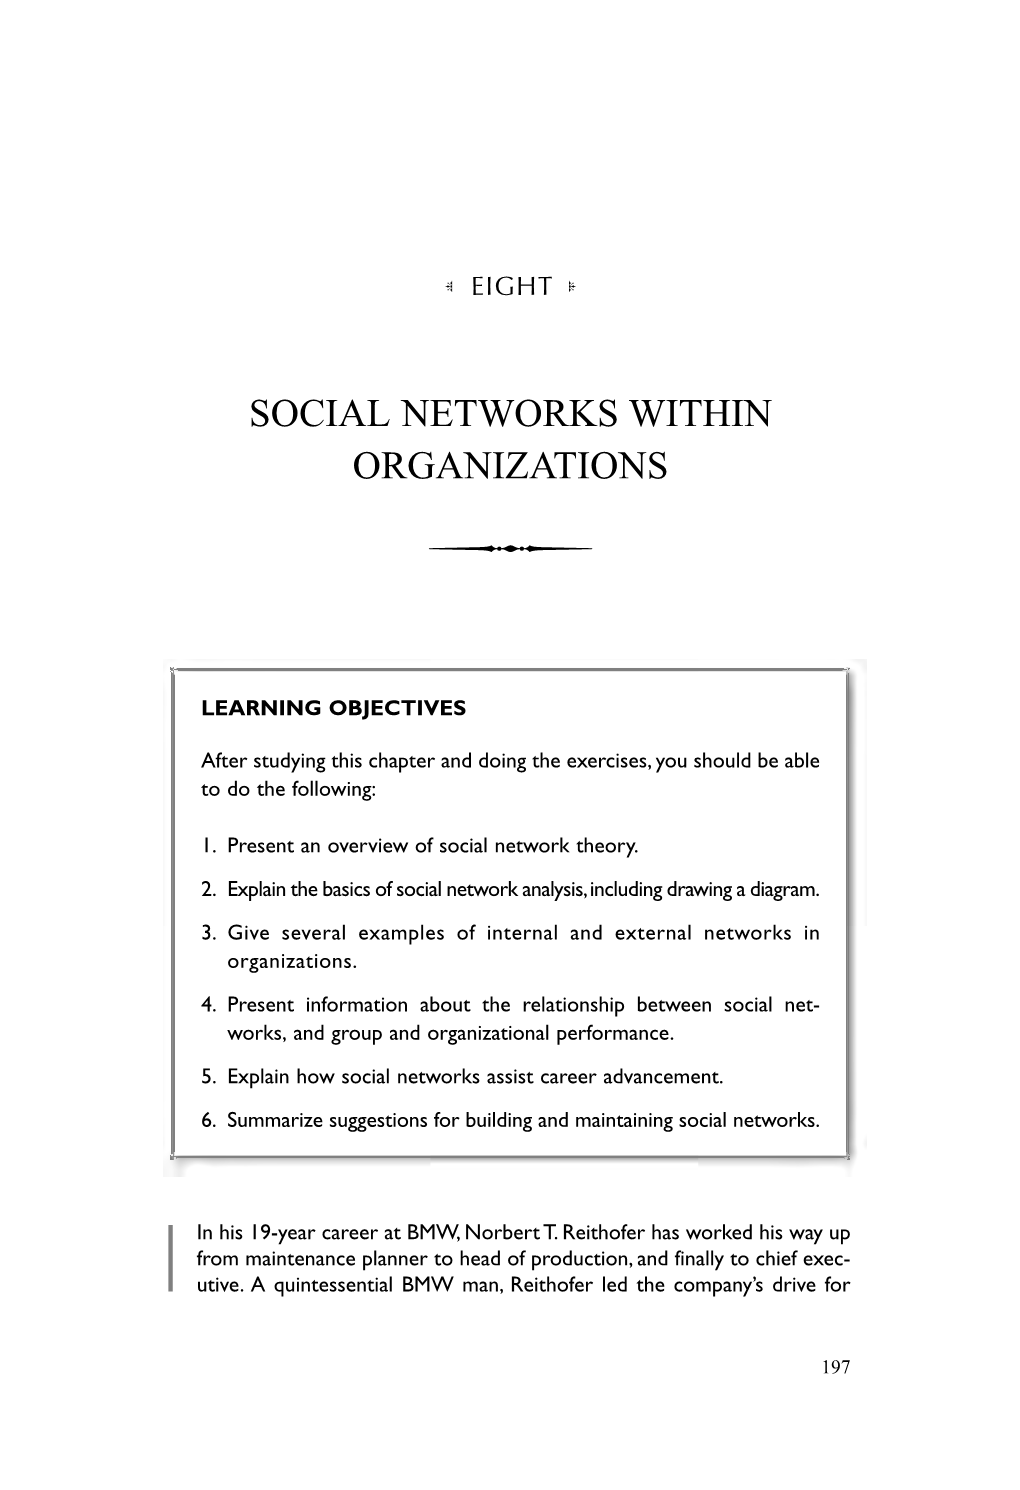 Social Networks Within Organizations